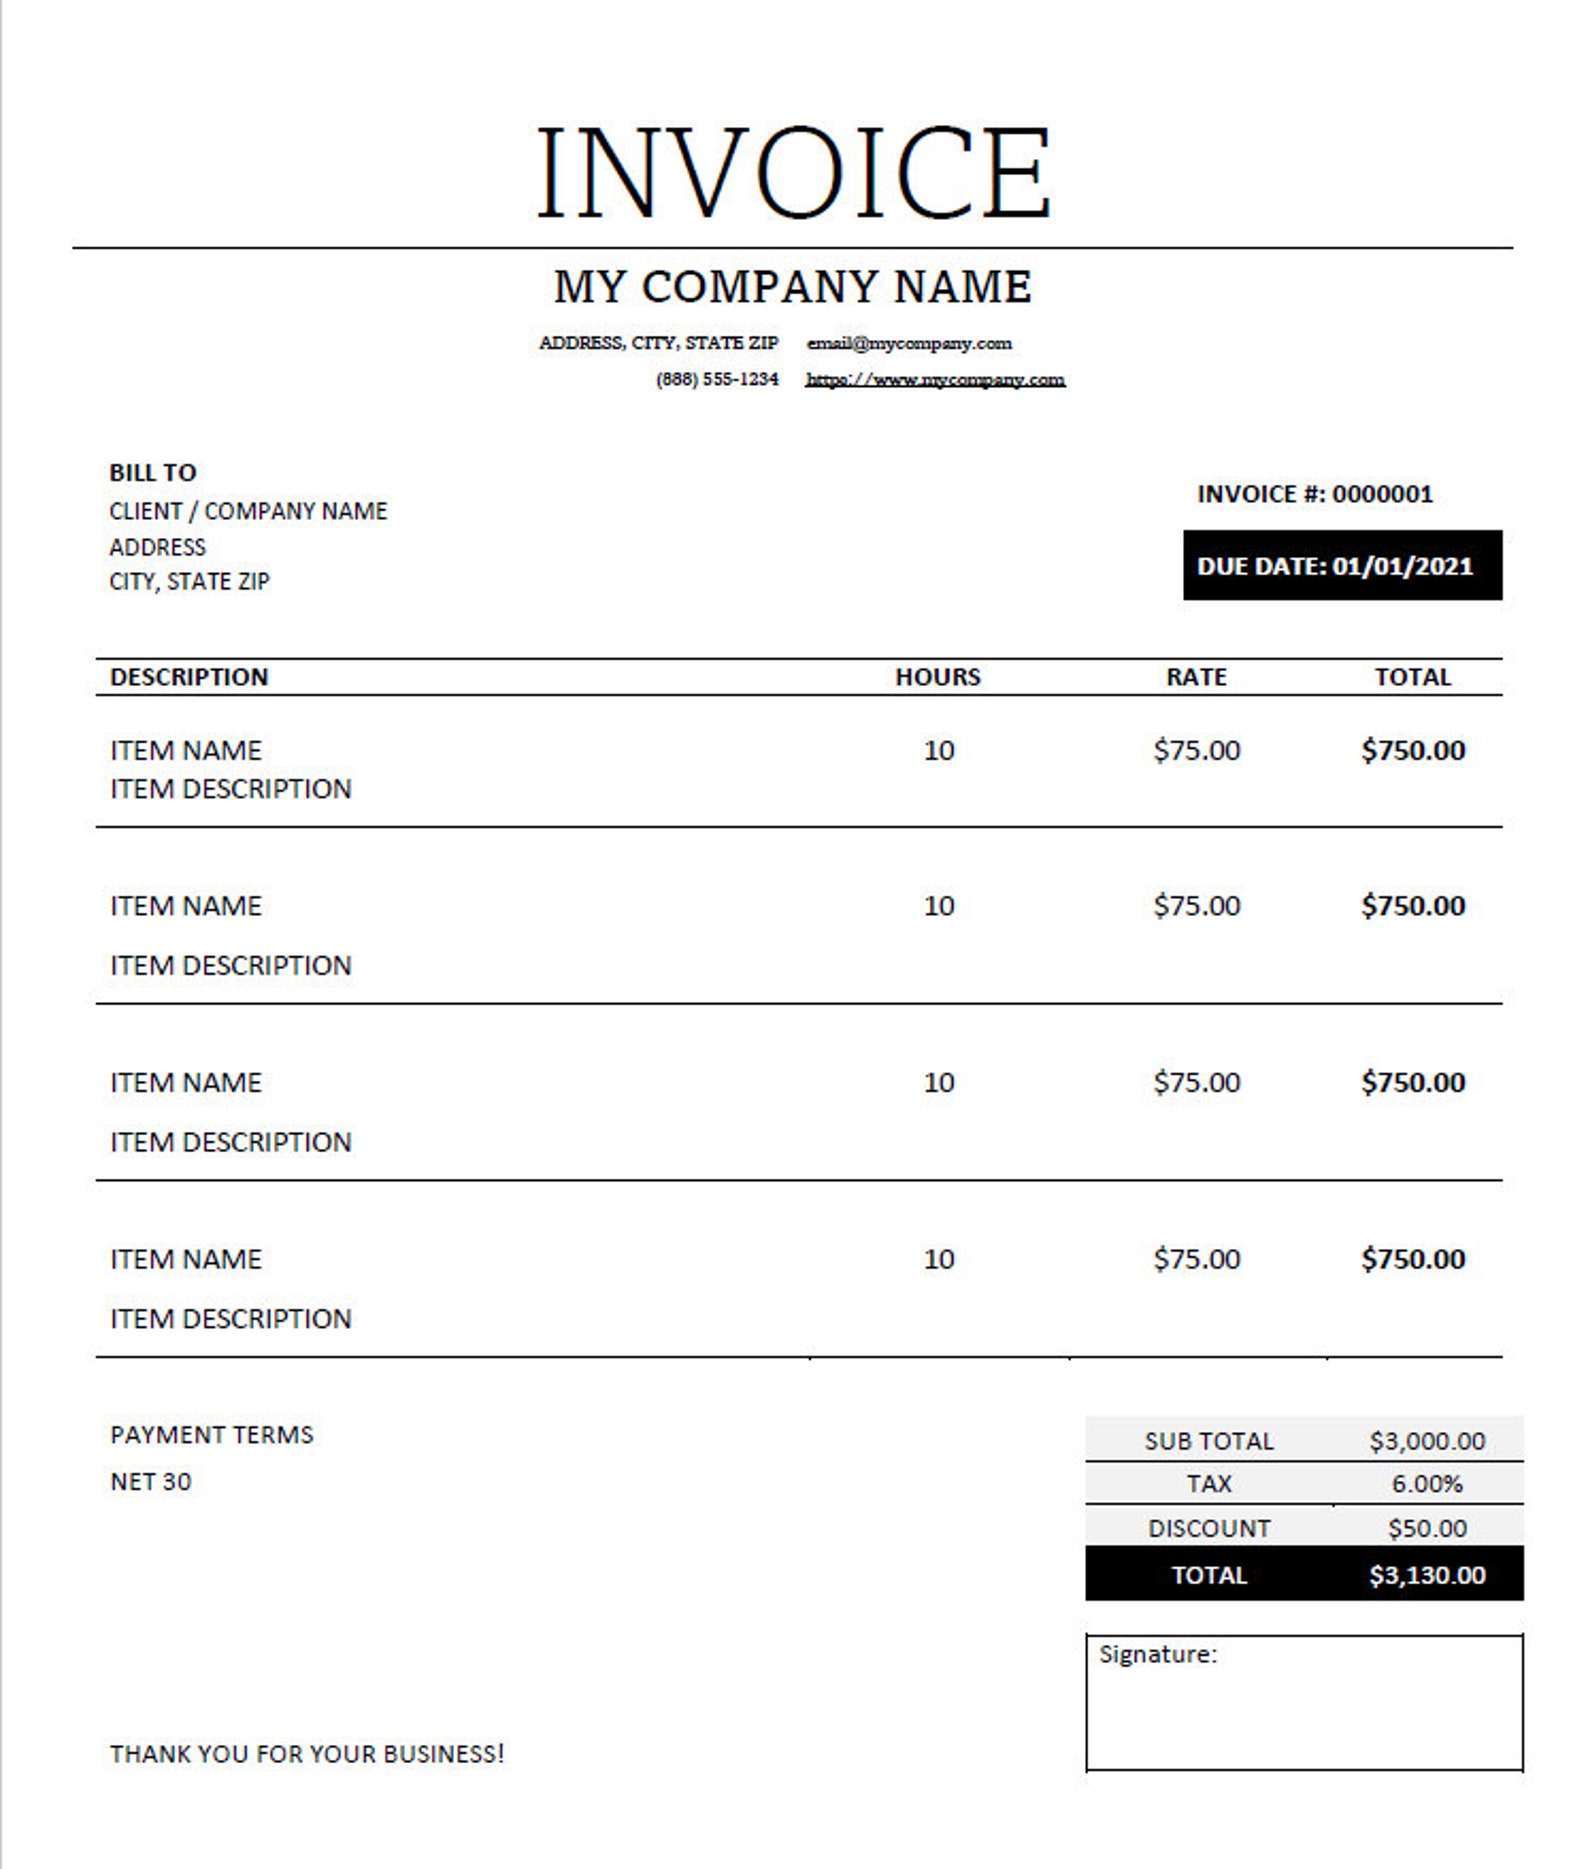 Invoice Template Word Printable & Editable Black and White | Etsy